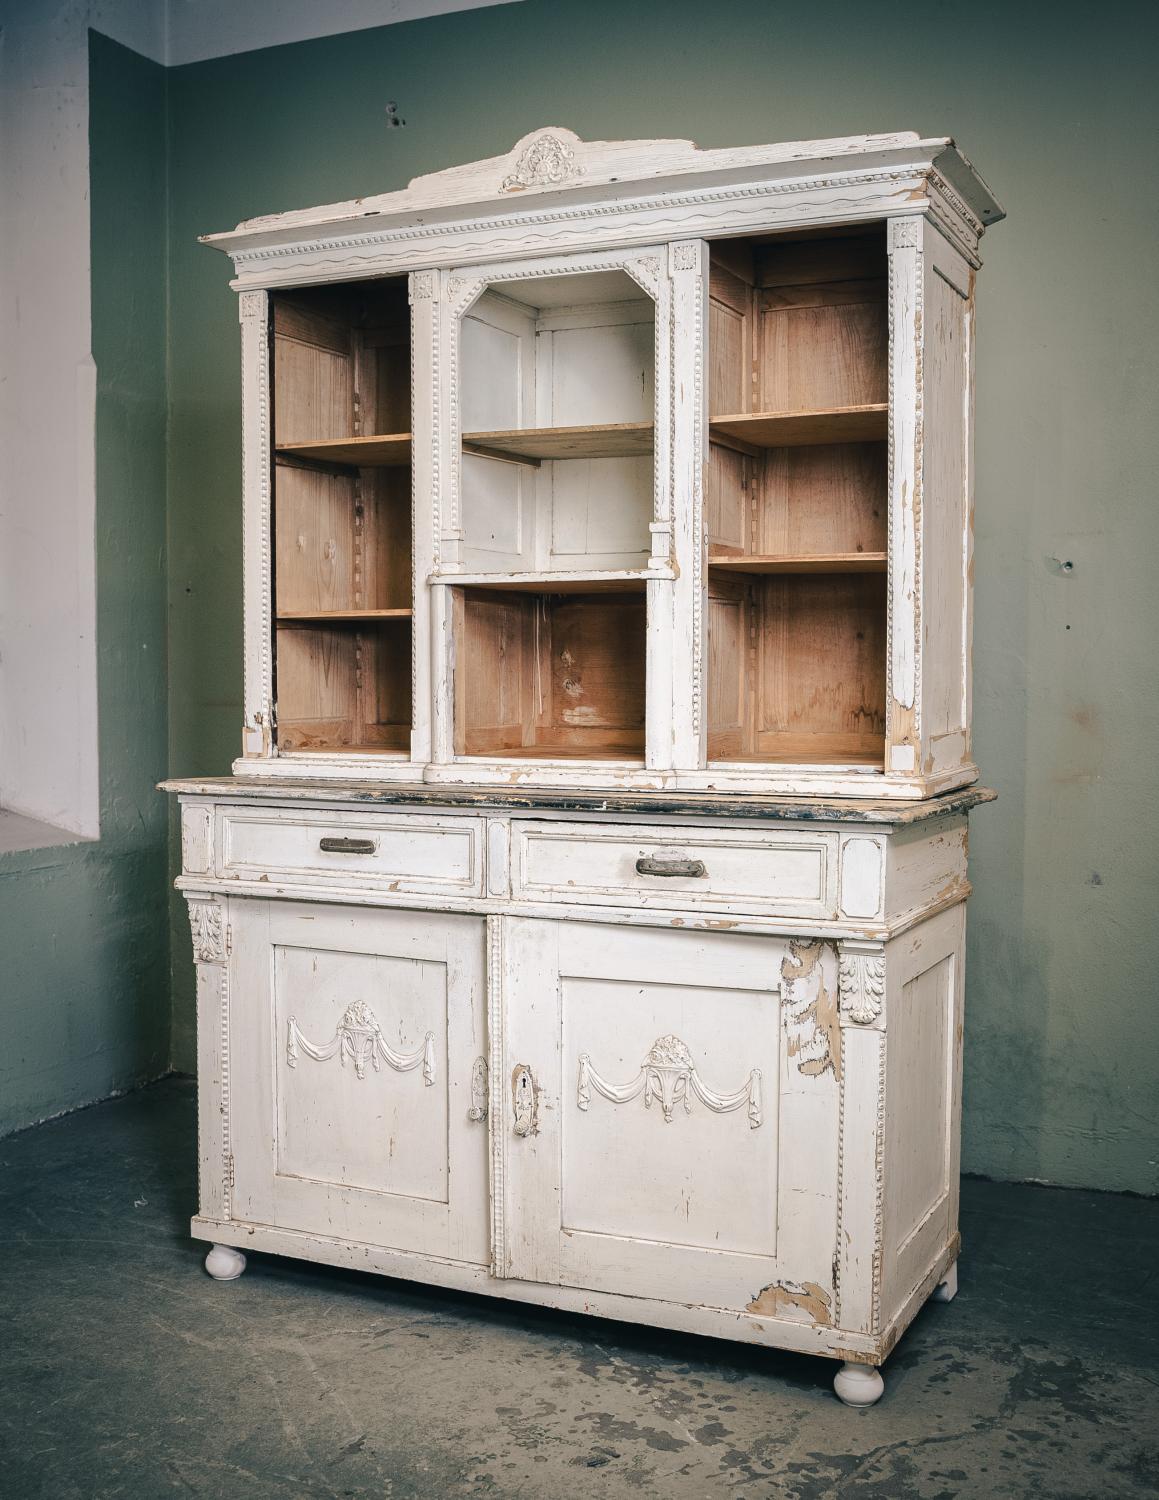 White Vintage Cabinet from the 1920s (original color)